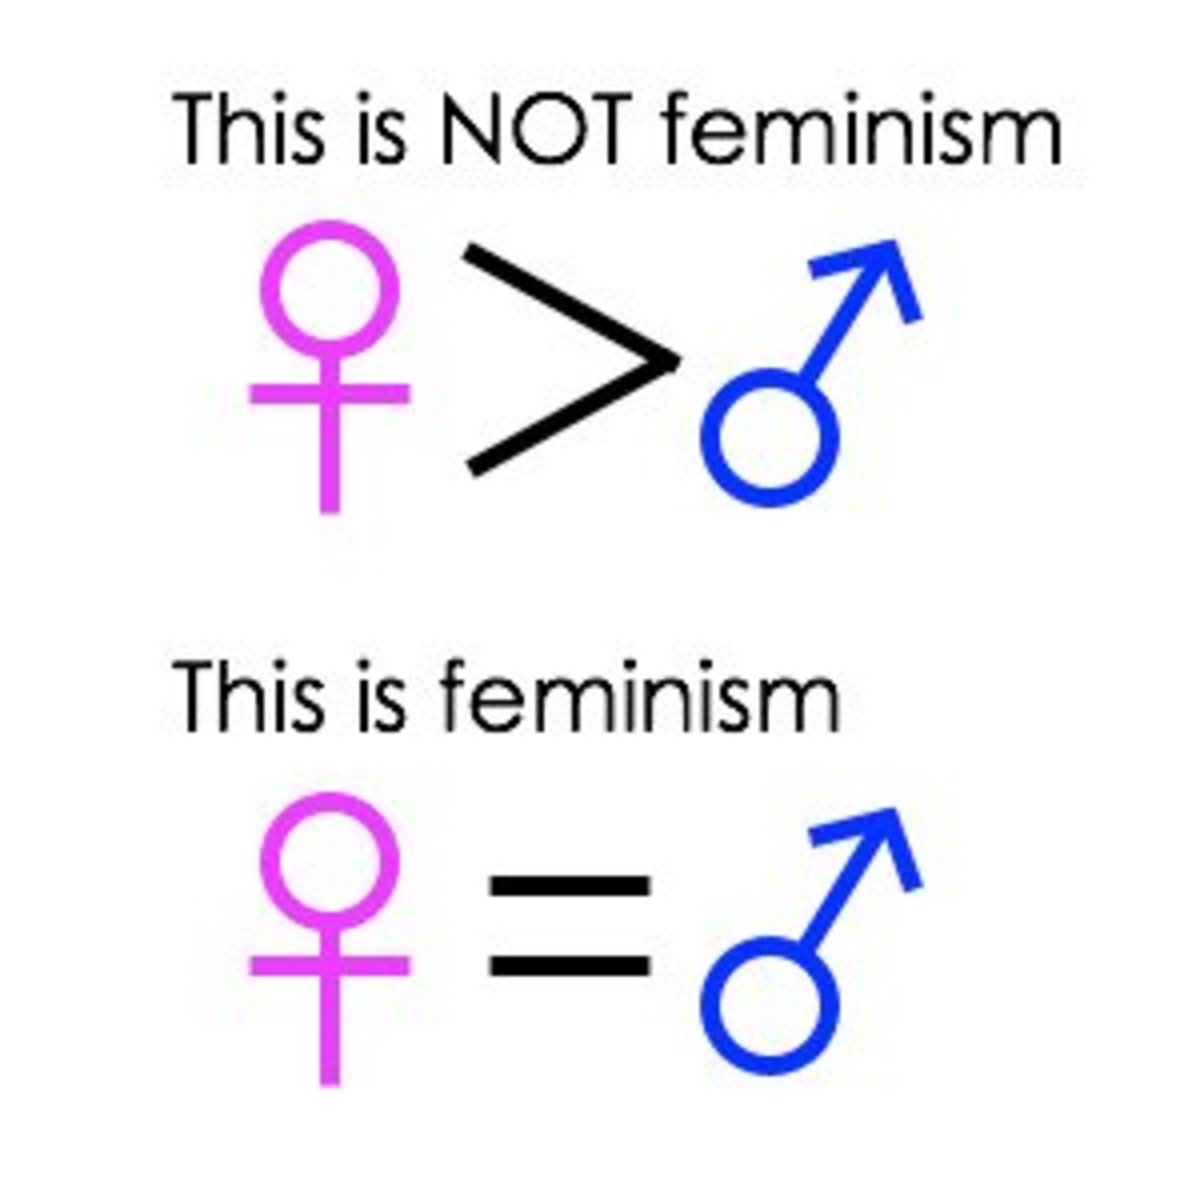 Feminism and Women Rights.